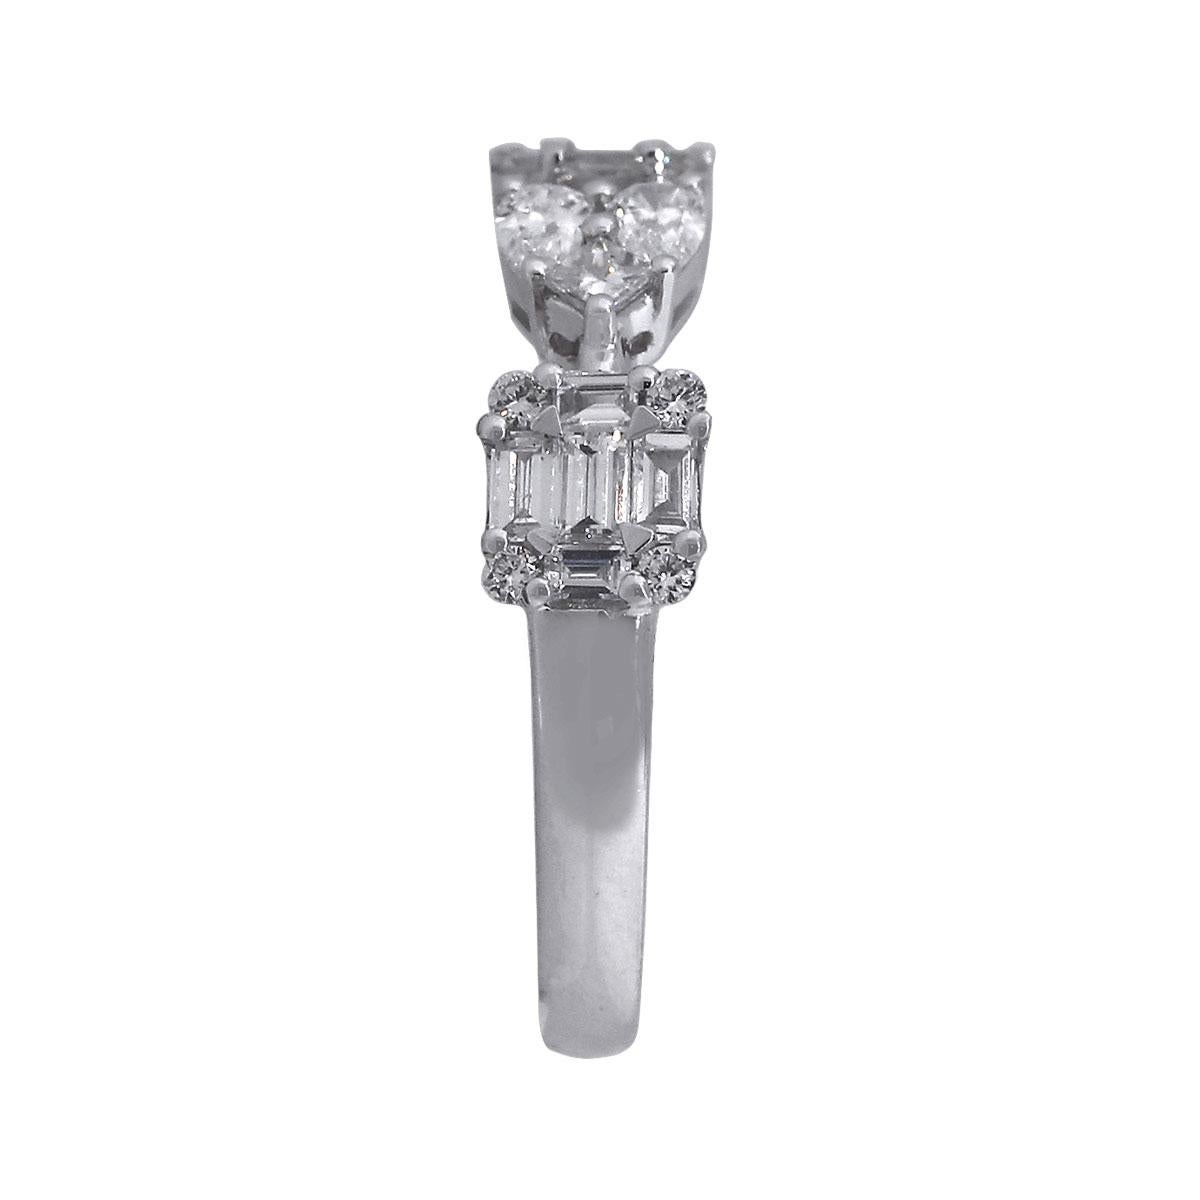 Material: 18k White Gold
Diamond Details: approx. 0.36ctw of Pear shape diamonds. Diamonds are G/H in color and VS in clarity
                             approx. 0.53ctw of Baguette cut diamonds. Diamonds are G/H in color and VS in clarity
        